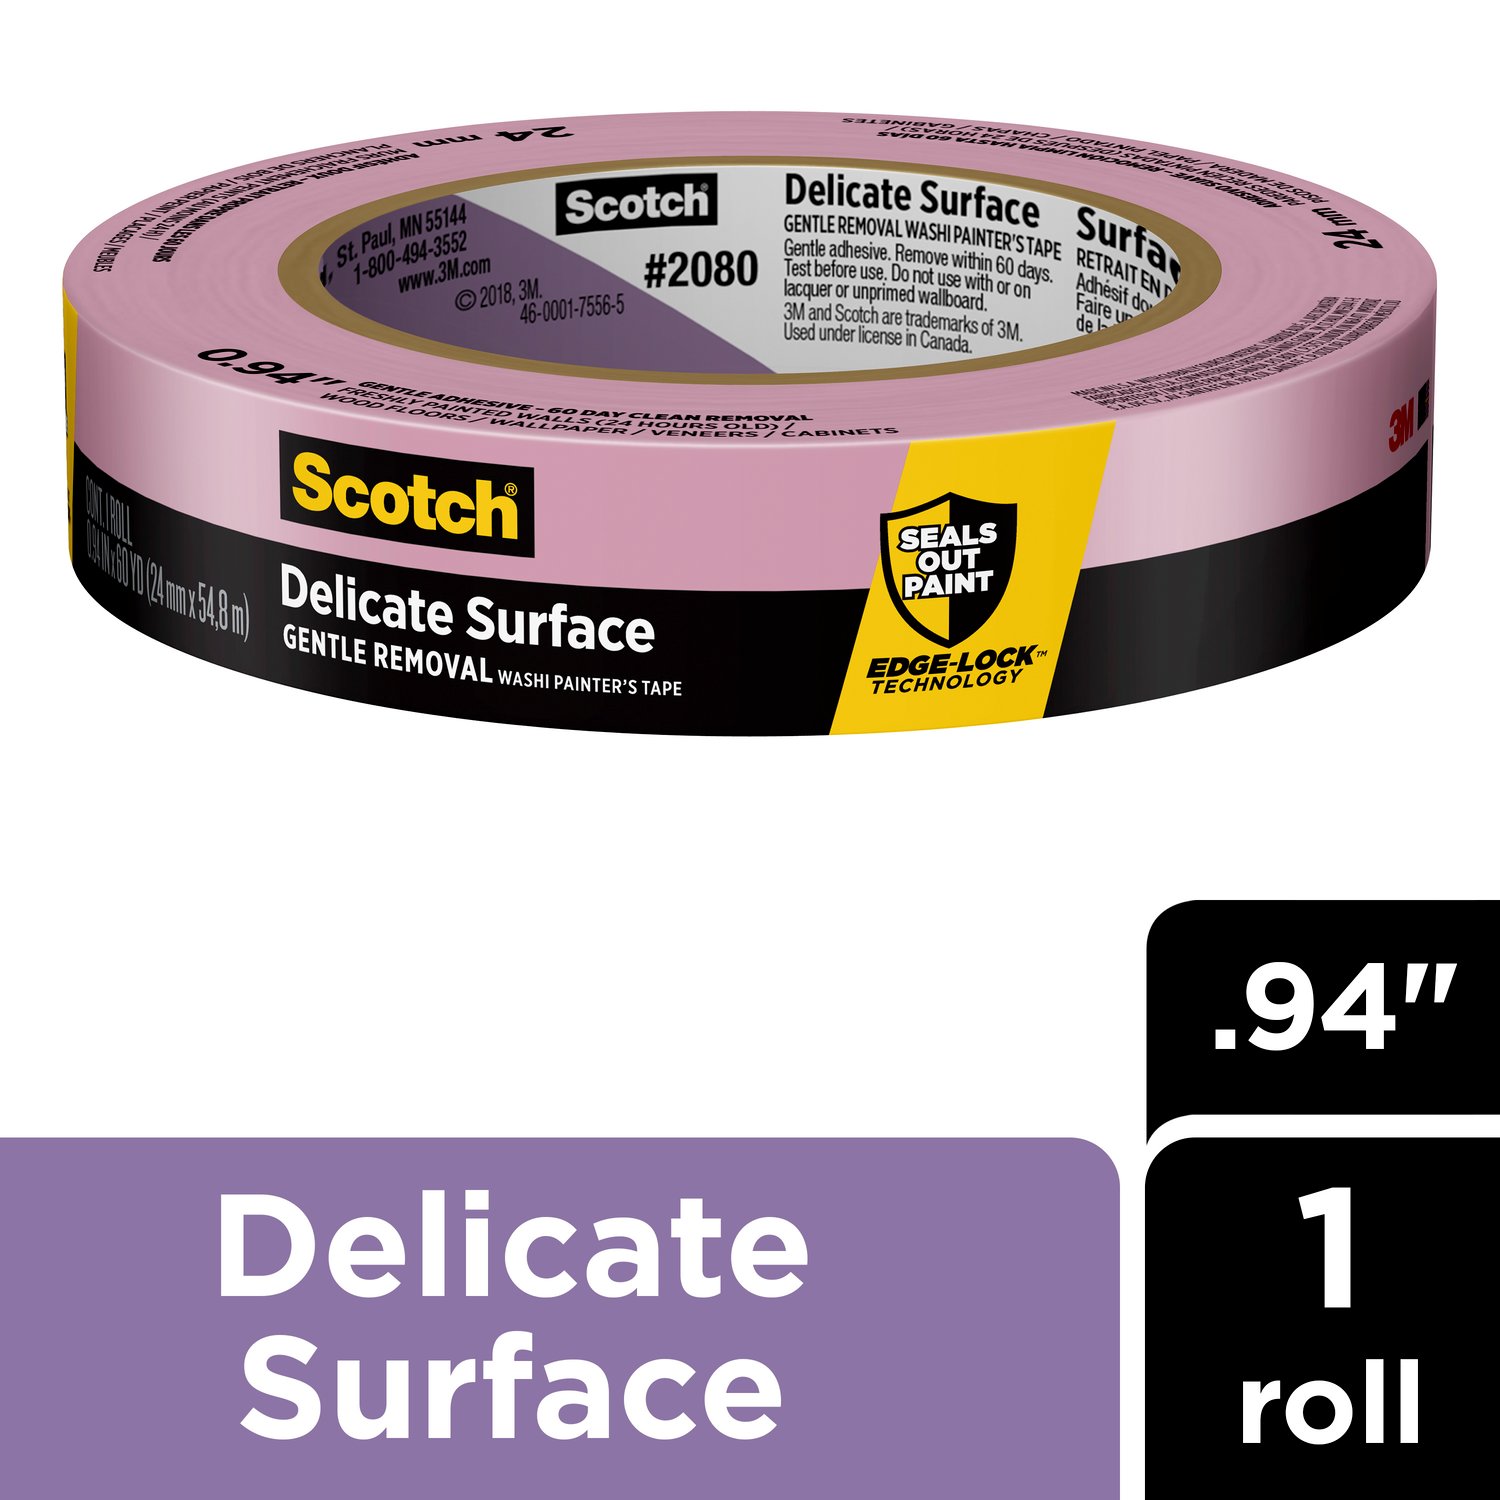 7100185006 - Scotch Delicate Surface Painter's Tape 2080-24EC, 0.94 in x 60 yd (24mm
x 54,8m)